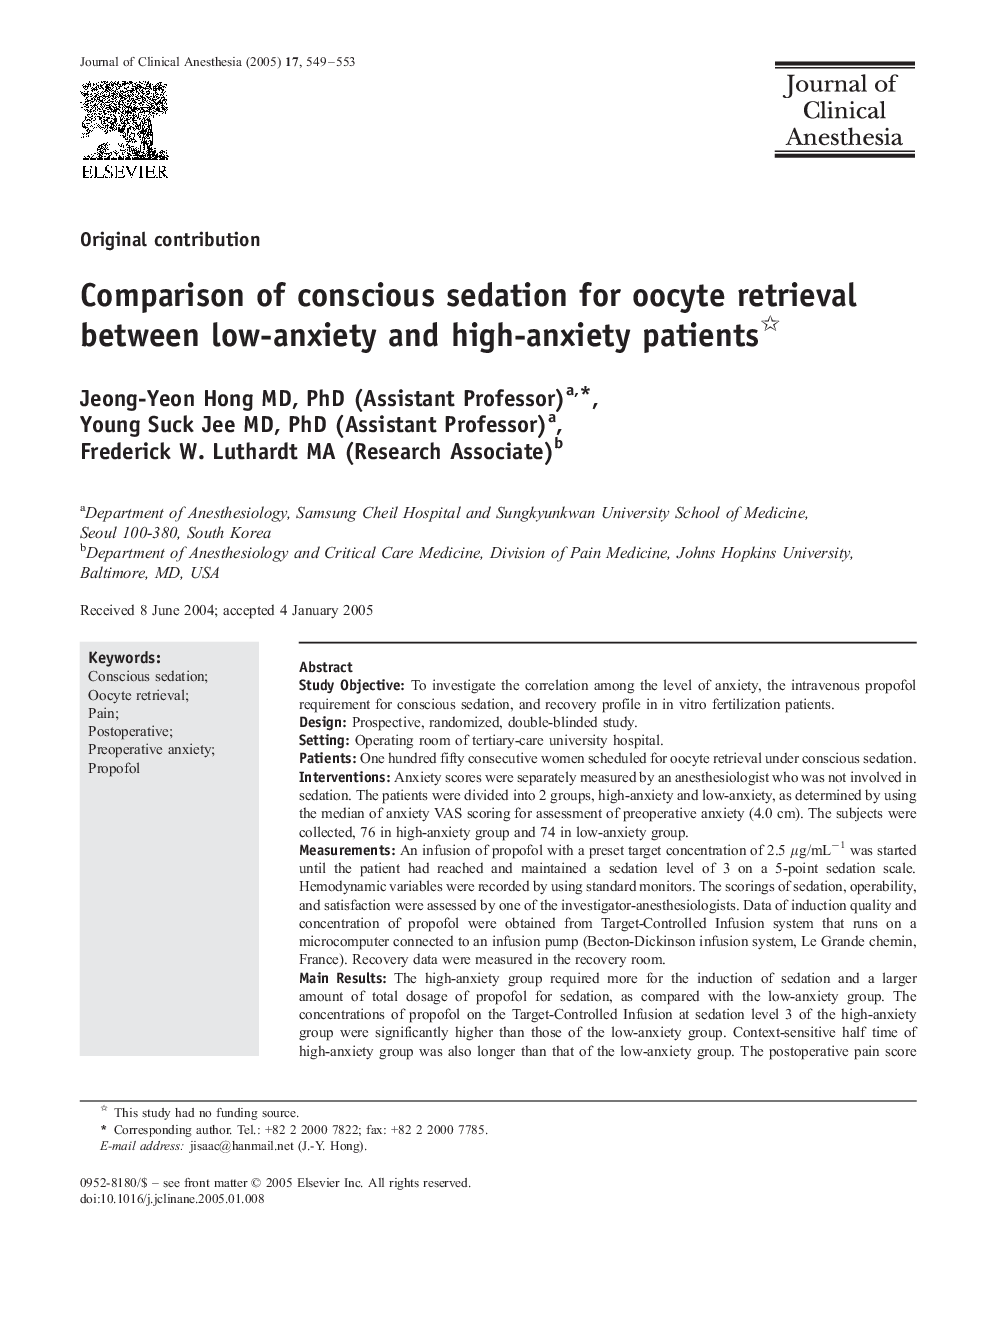 Comparison of conscious sedation for oocyte retrieval between low-anxiety and high-anxiety patients